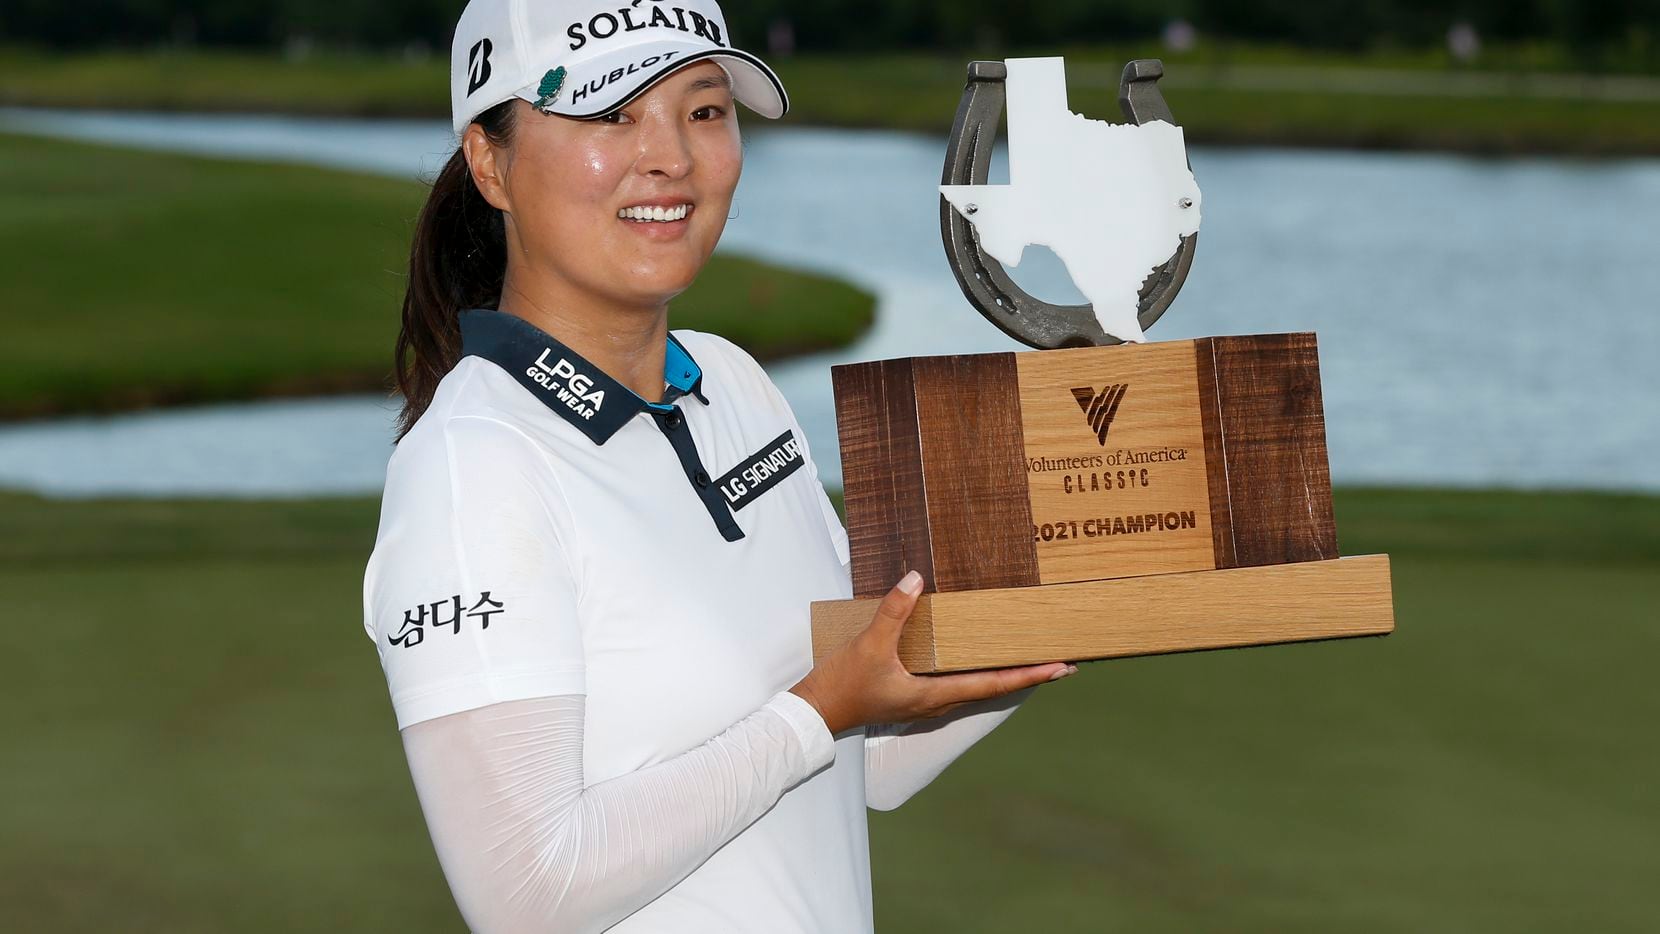 Professional golfer Jin Young Ko lifts the winner’s trophy after winning the LPGA VOA...